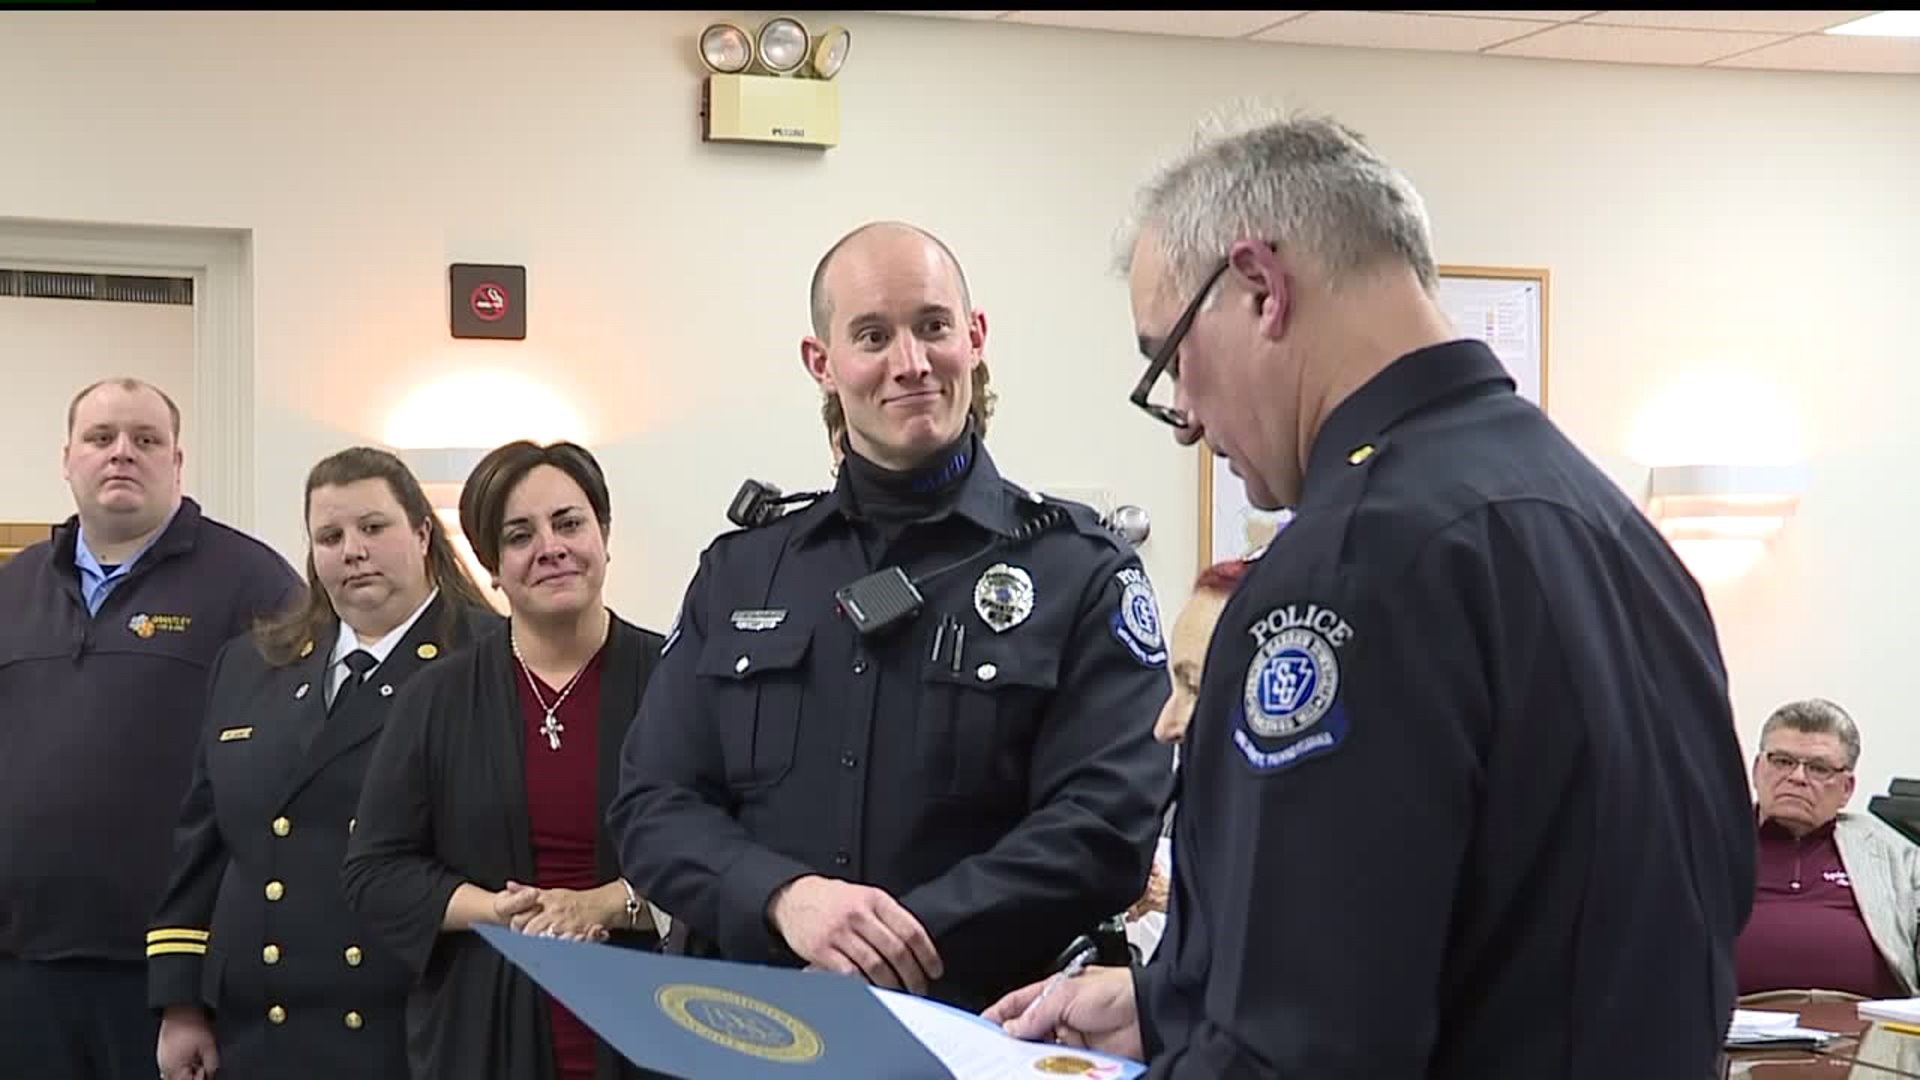 First responders honored for service